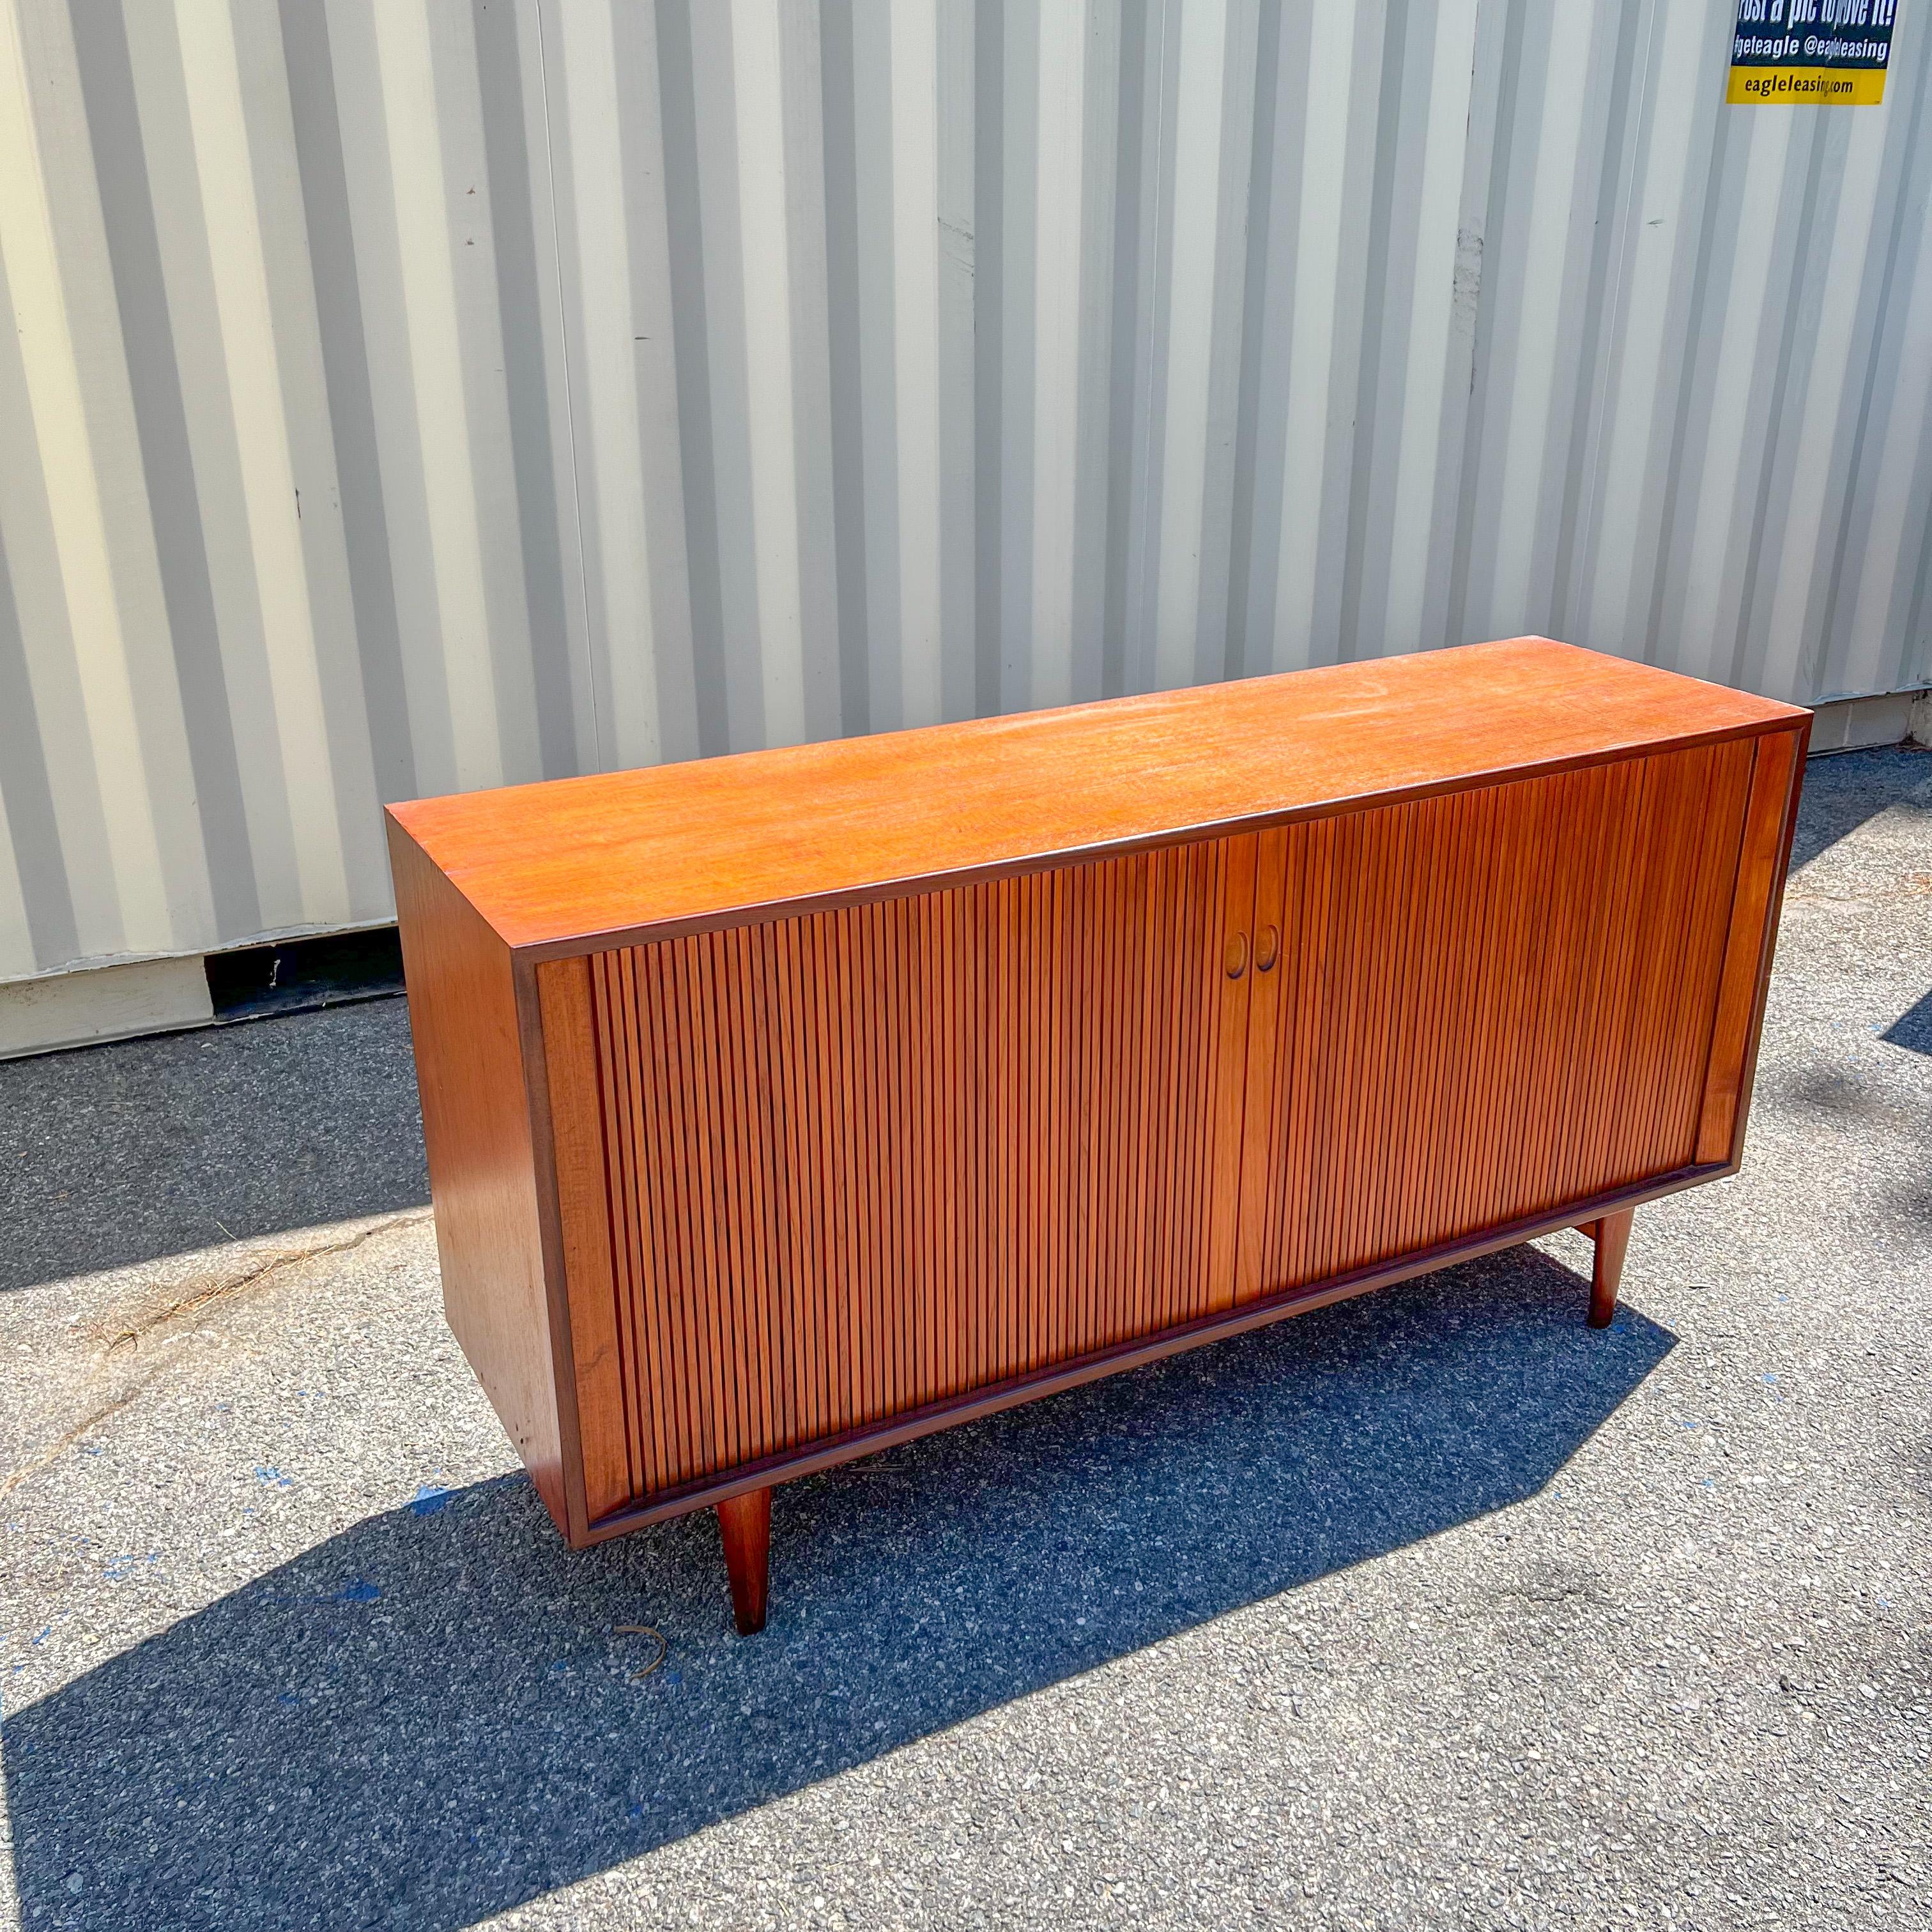 Mid-Century Modern Danish teak credenza with tambour doors and finished back designed by IB Kofod Larsen for Clausen and Sons. Some scuffing/scratching to the teak finish.